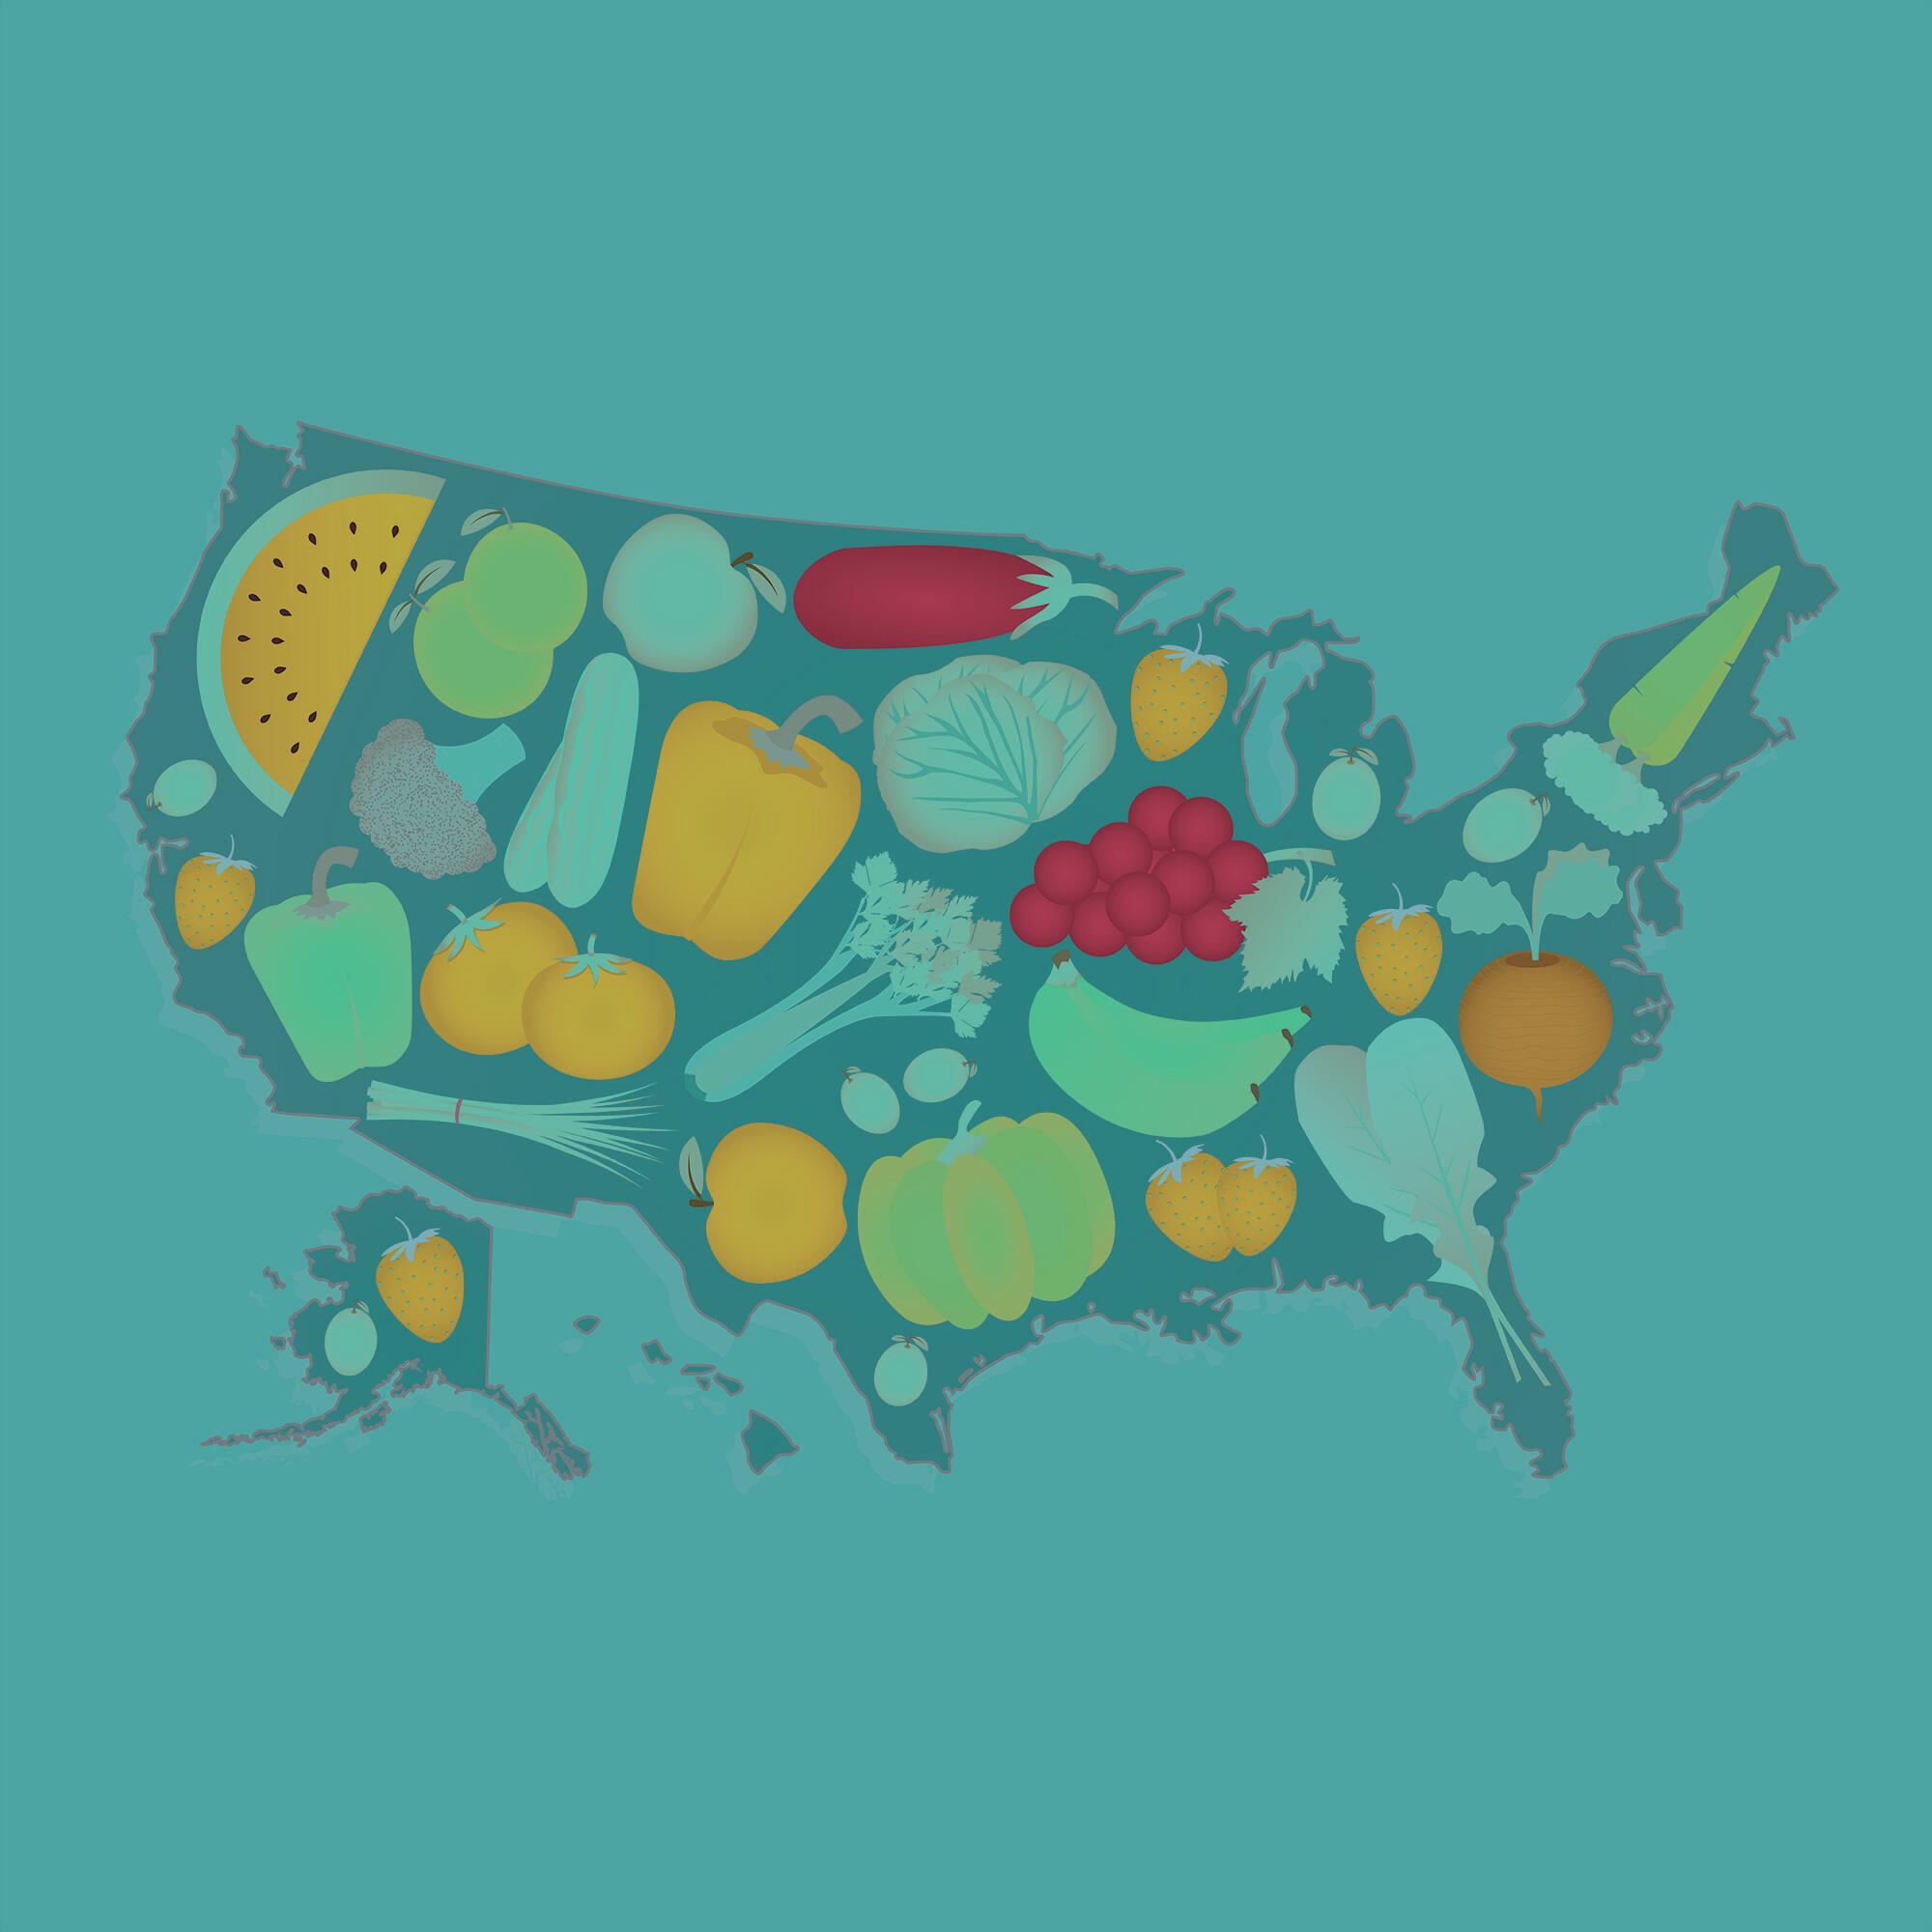 Map of United States full of fruits and vegetables (tomato , apple, orange , eggplant, cabbage, cucumber , broccoli, grapes, arugula, banana, peppers, squash , celery, green onions , beets, strawberries, watermelon, carrot). Green background.